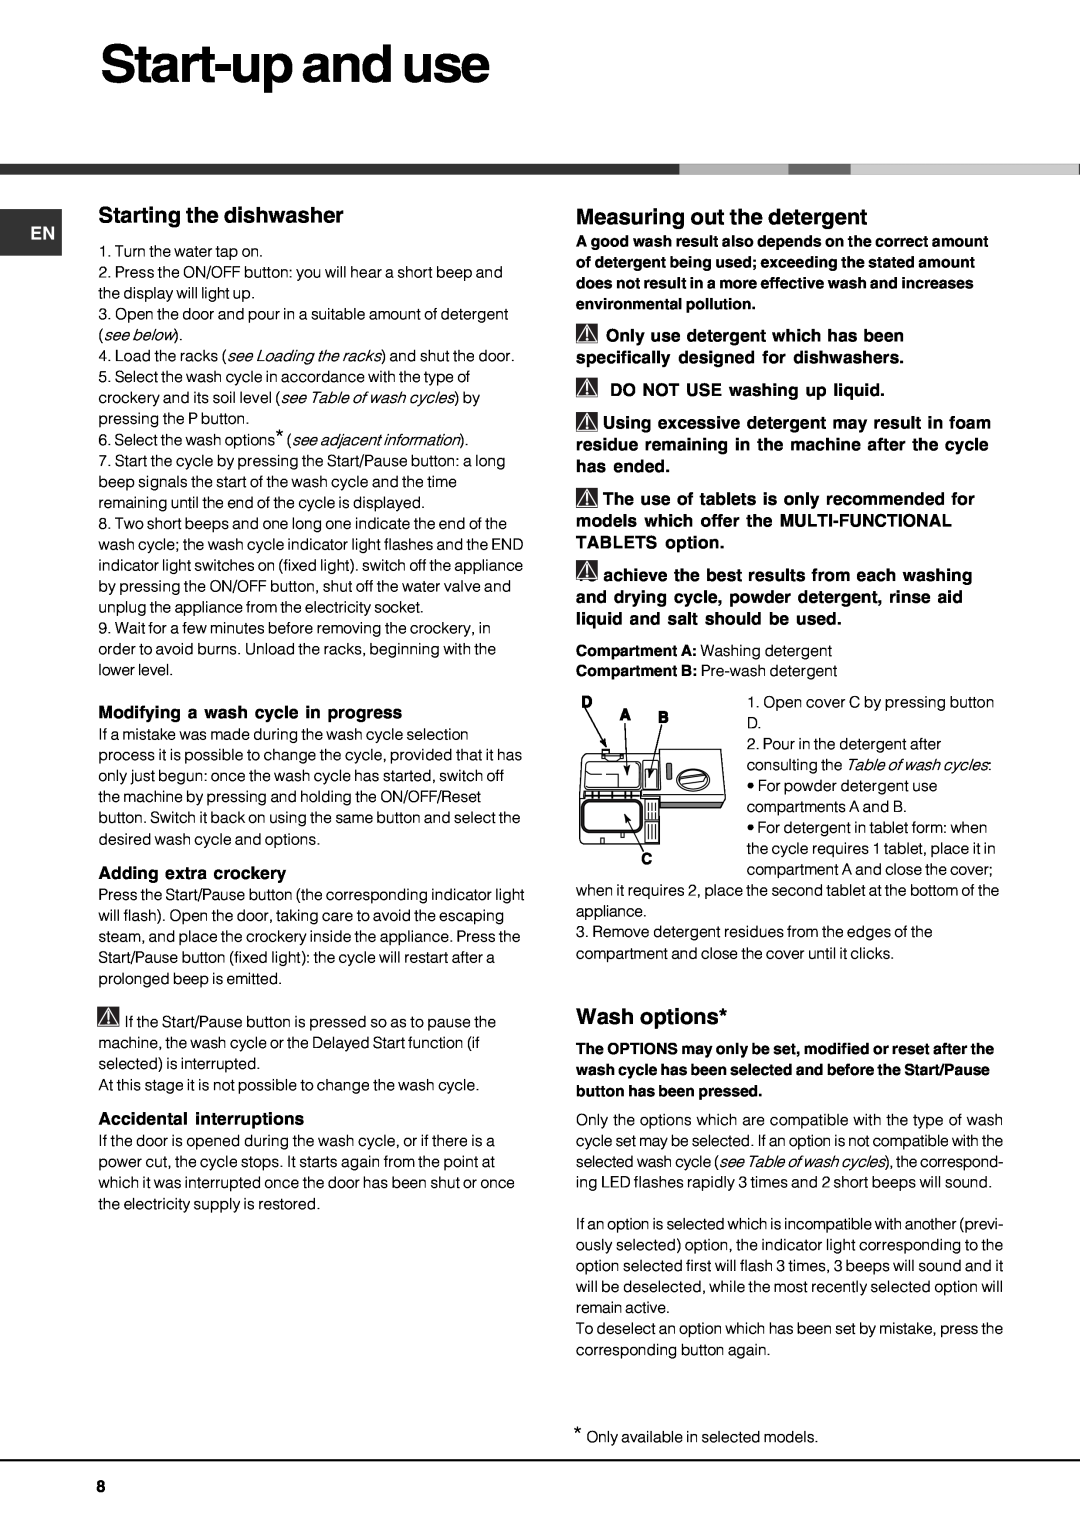 Hotpoint FDF 784 manual Start-upand use, Starting the dishwasher, Measuring out the detergent, Wash options 